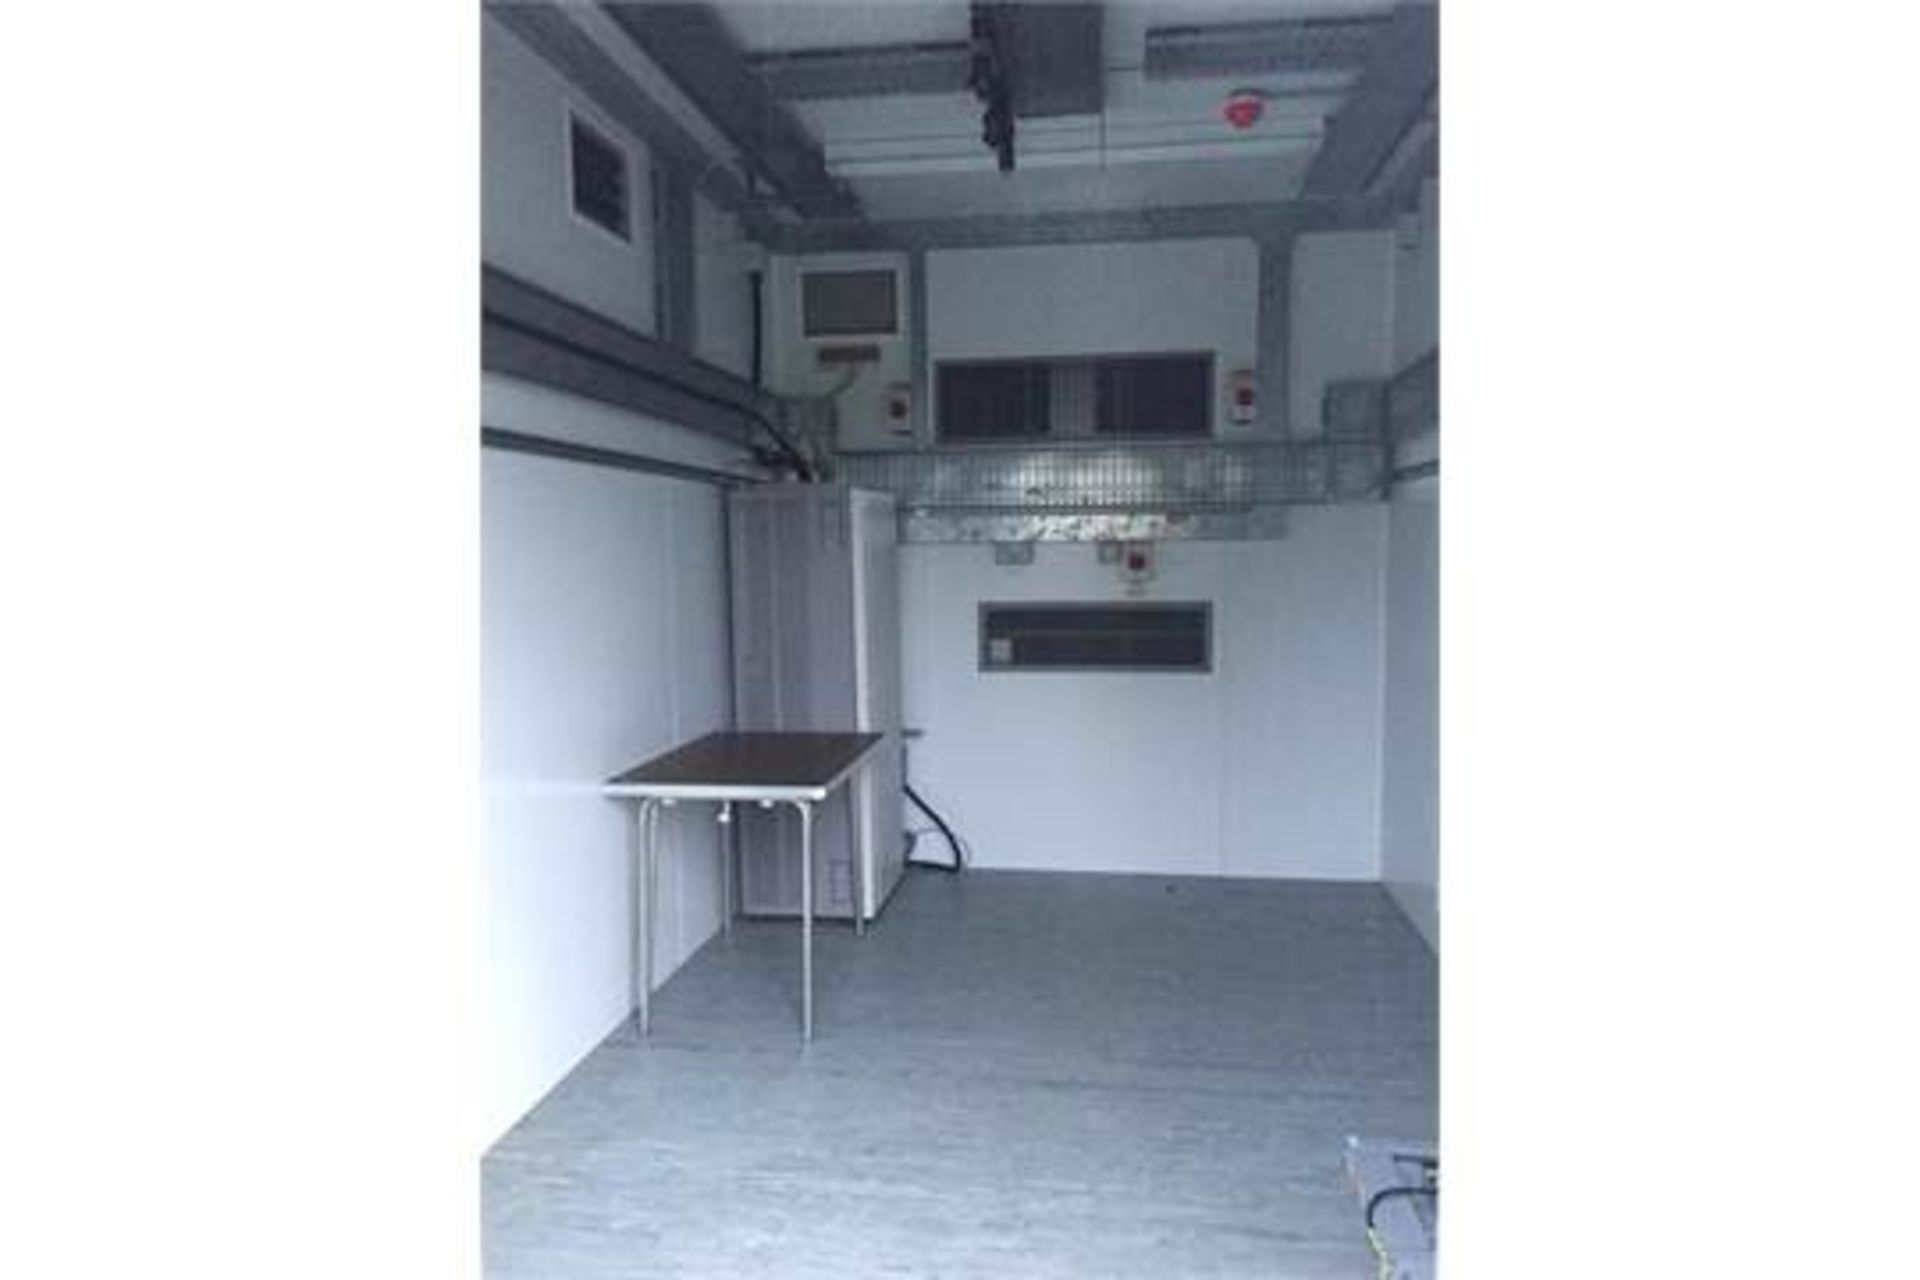 1 x Equipment Accommodation Module Portable Cabin Enclosure - Manufactured by the Elliot Group For - Image 11 of 26